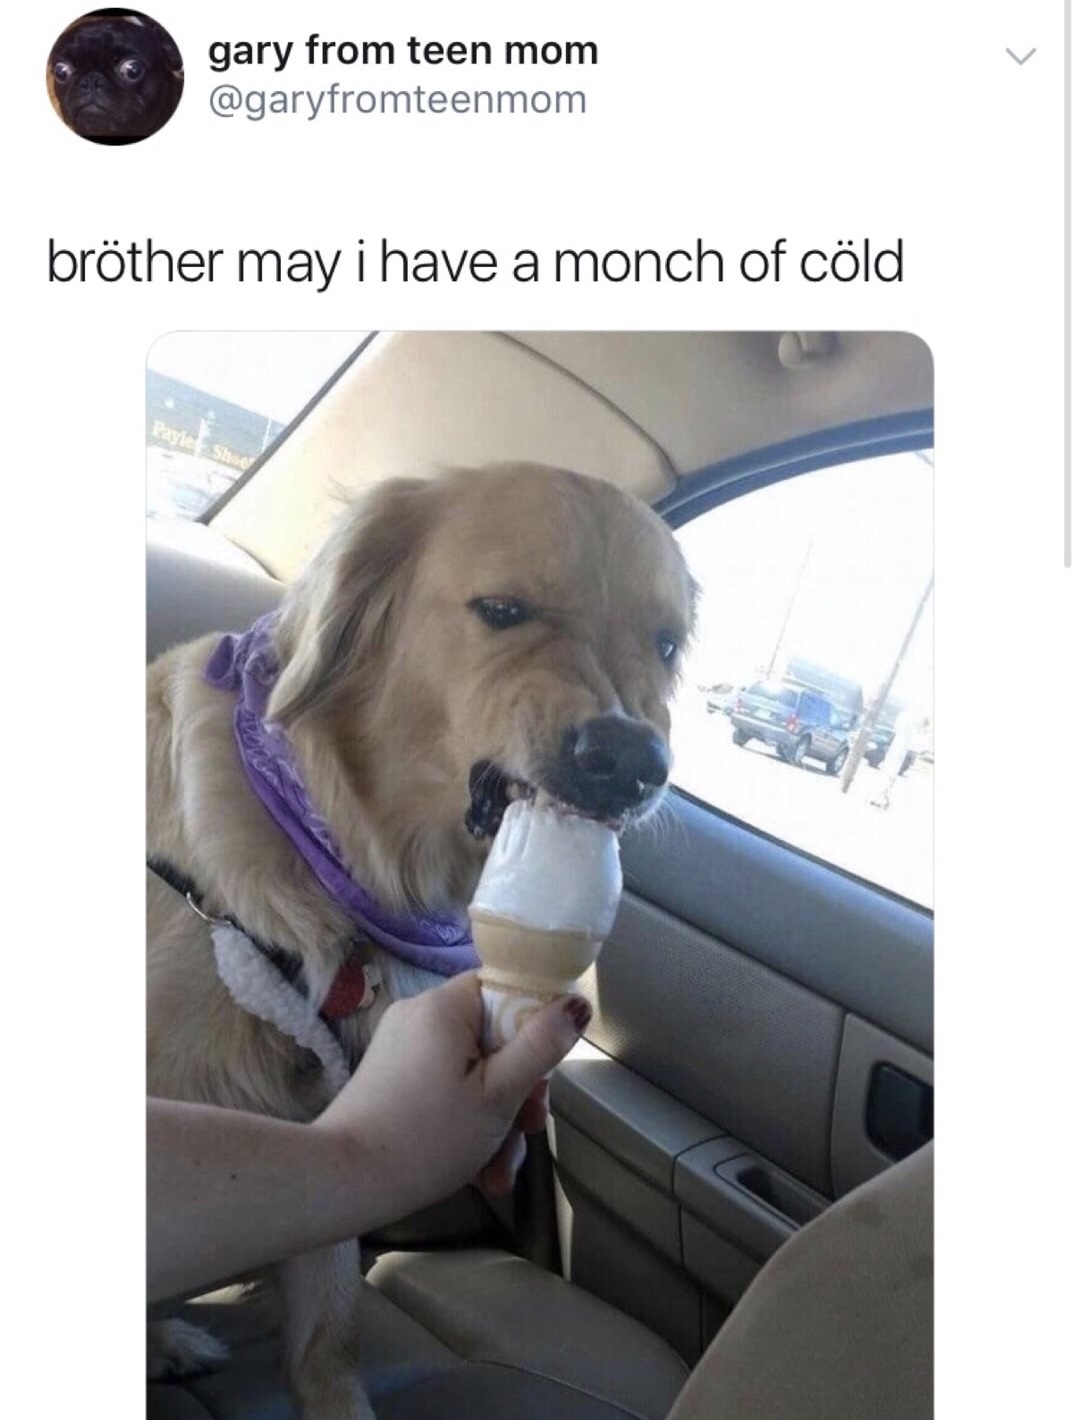 dog eating ice cream meme - gary from teen mom brther may i have a monch of cld